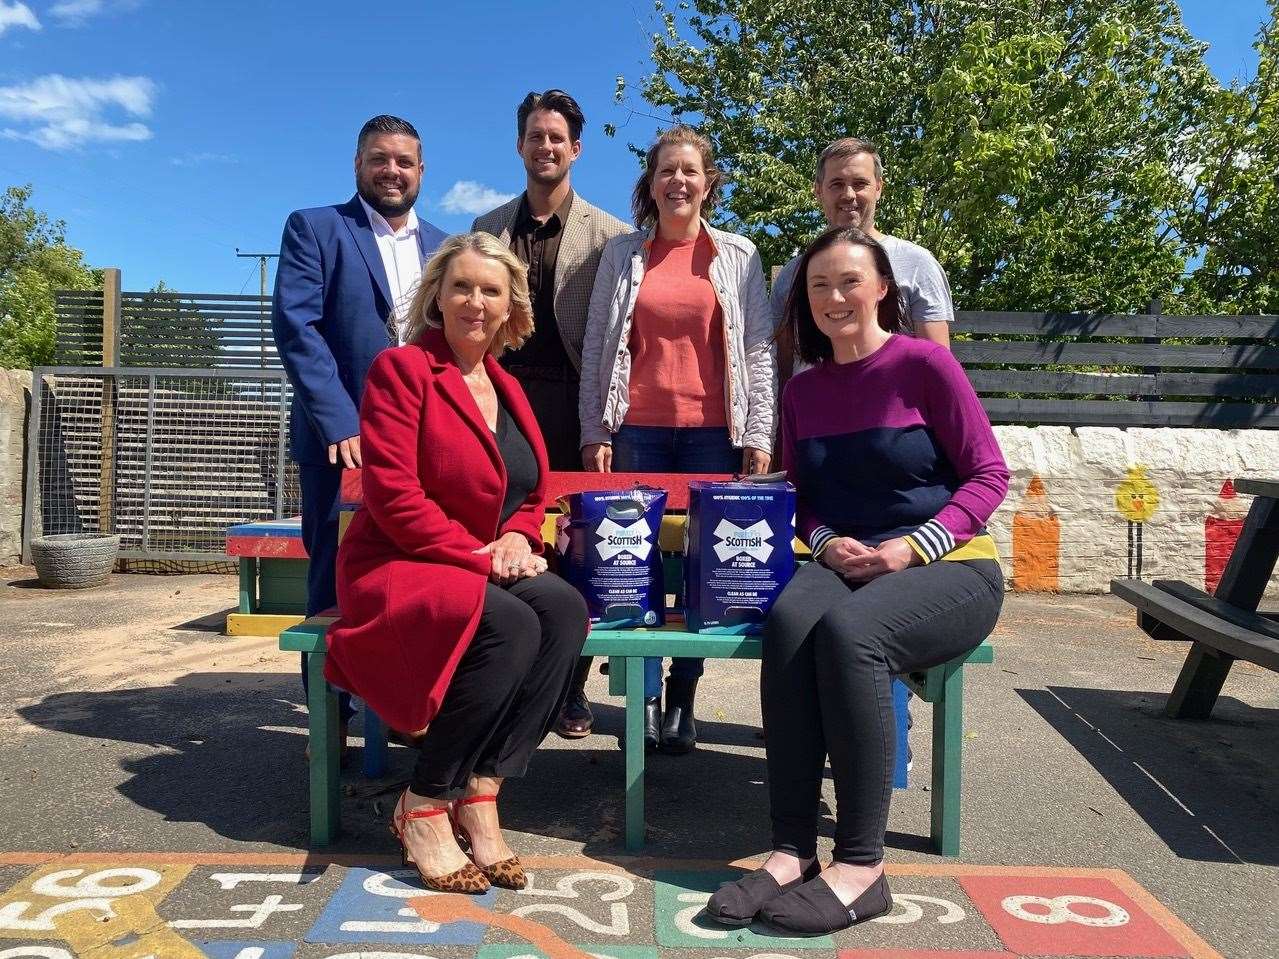 Representatives from PMC, Run Garioch and Rayne North Parent Council. Standing (from left) Neale Bisset, Simon Hudson, Lisa Strachan and Graham Morrison. Seated (from left) Annette Hudson and Kirsten Campbell.